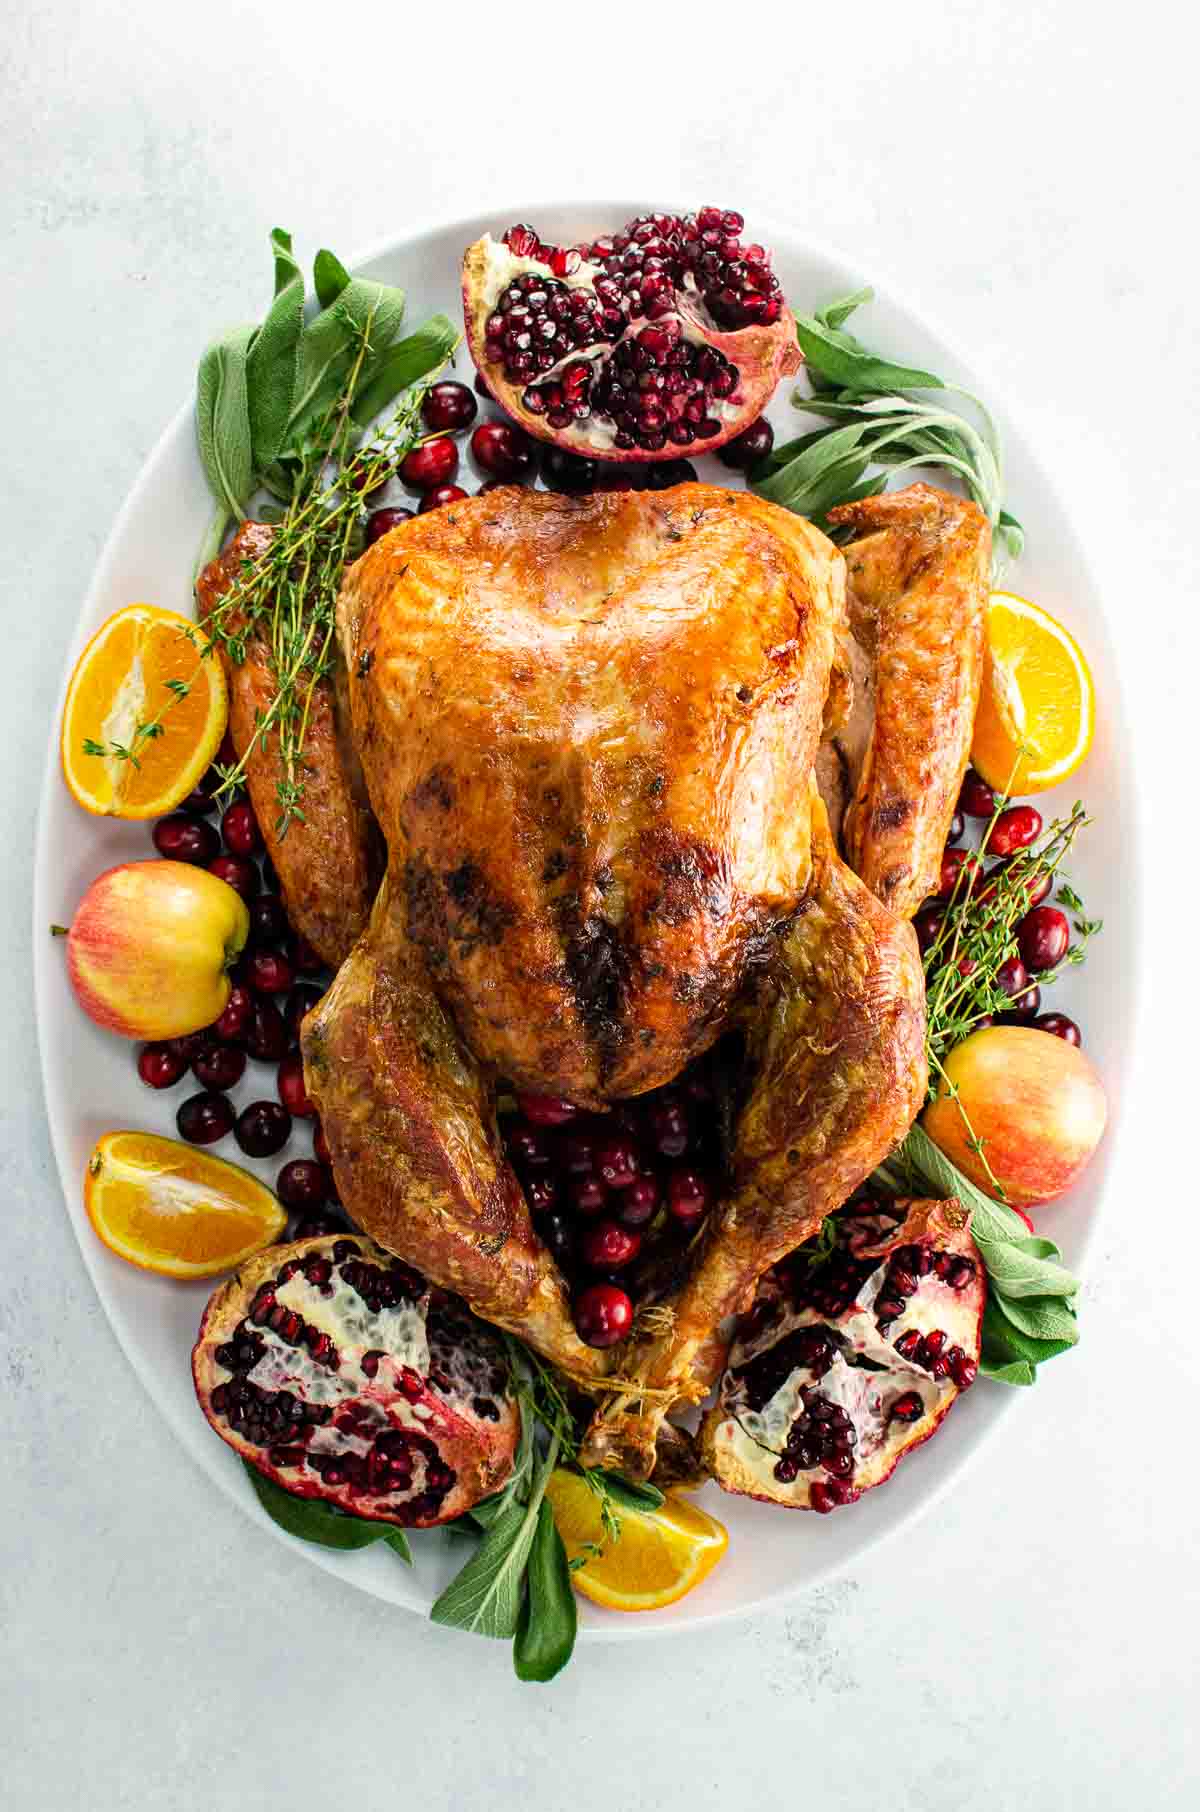 turkey on a beautiful platter is one of our thanskgiving must haves